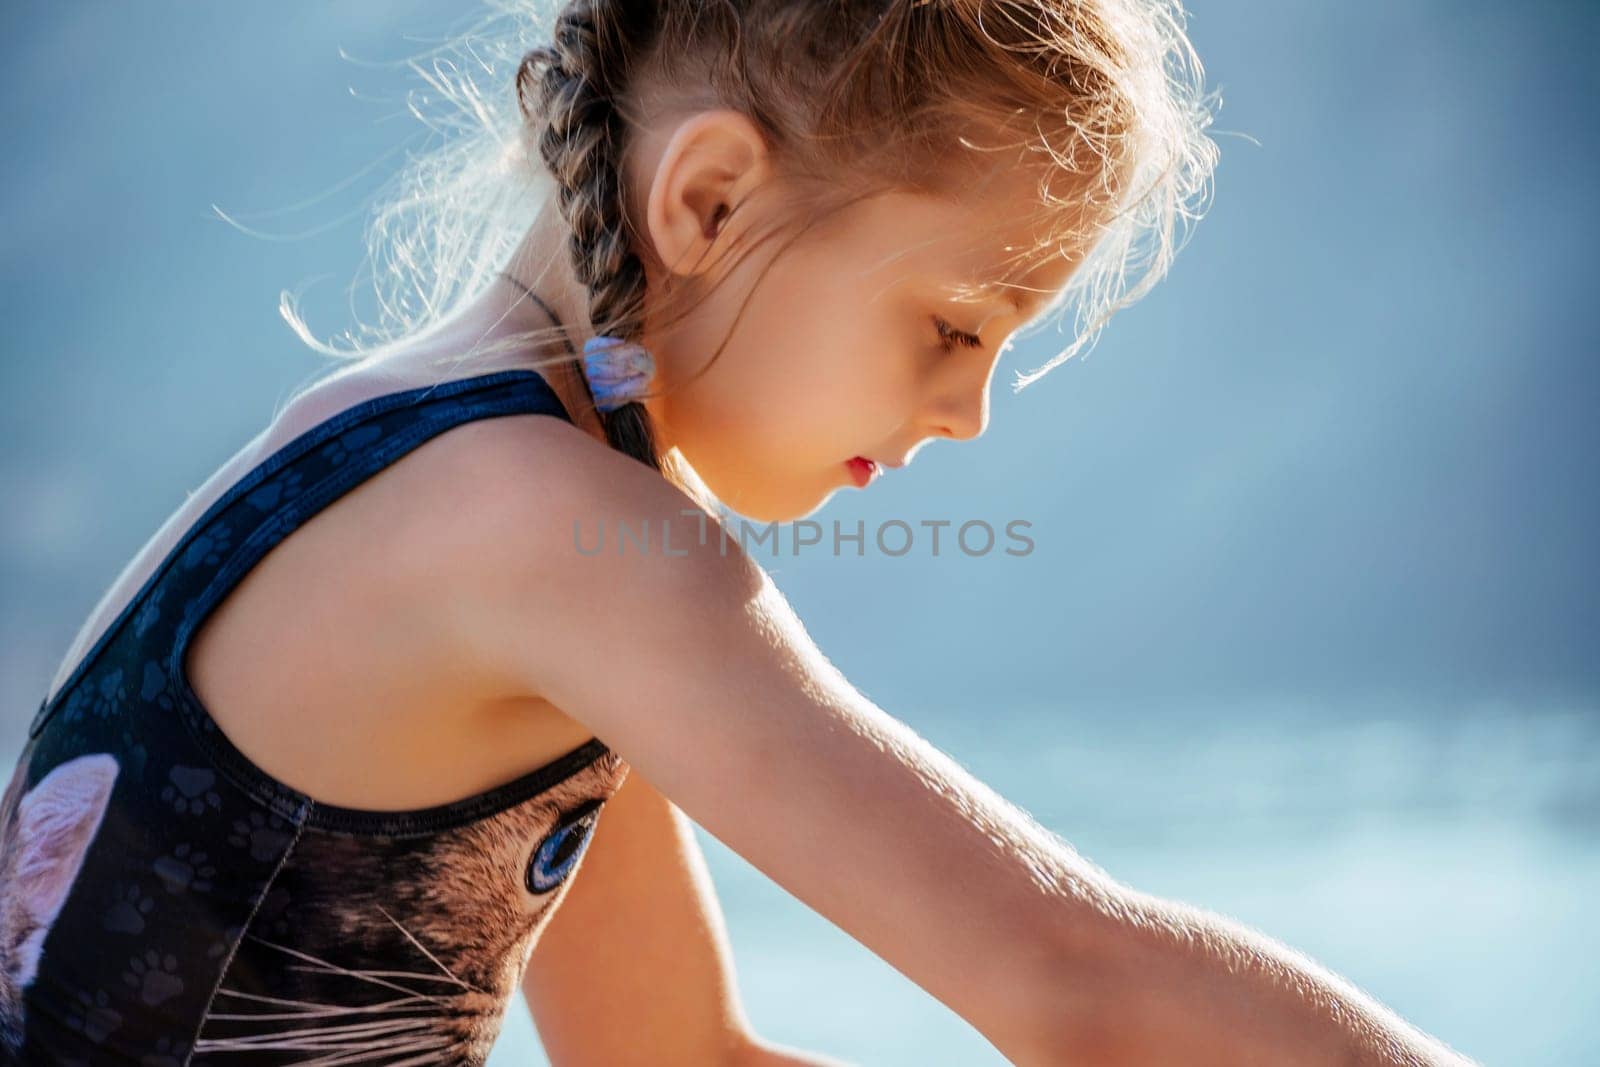 A young girl is sitting on the beach, looking at the water. She is wearing a blue tank top with a cat on it